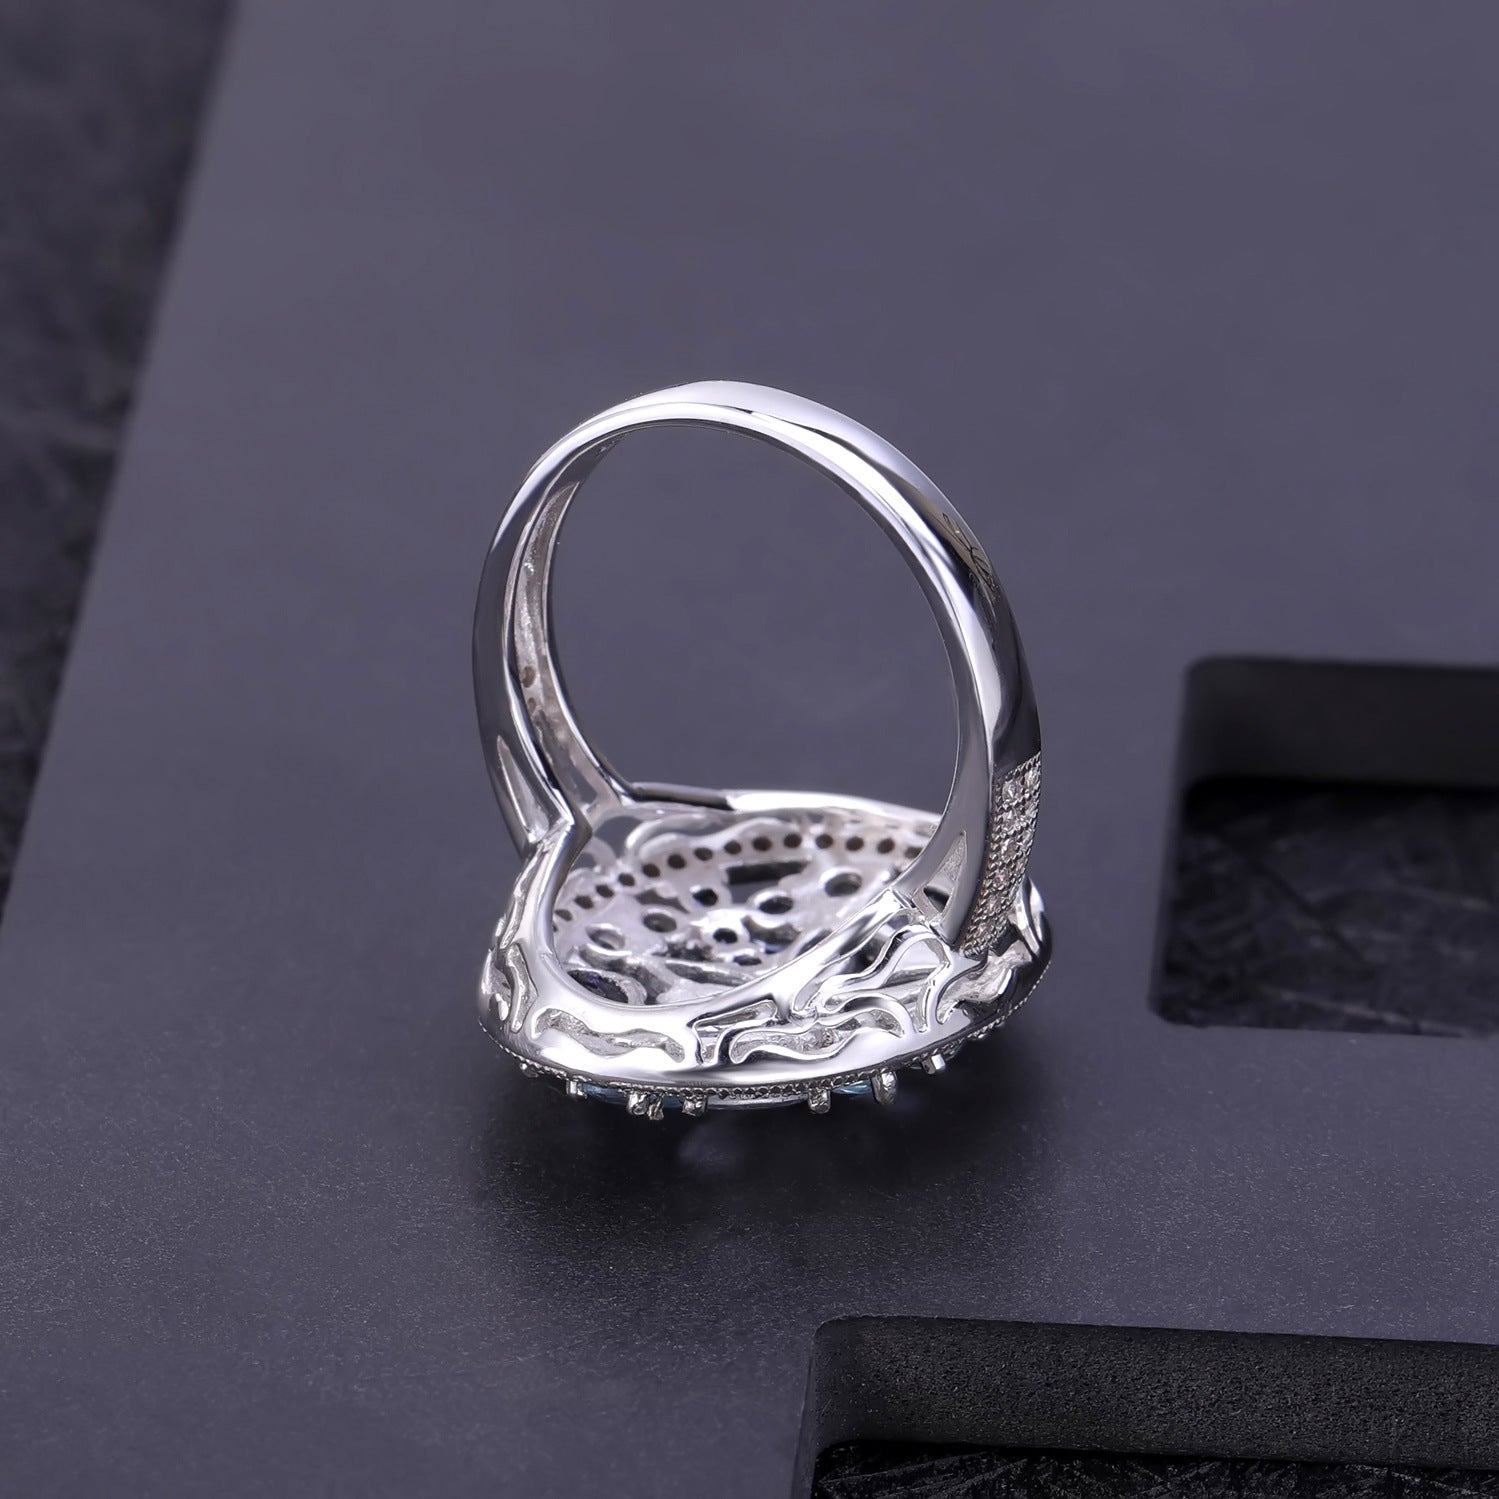 Fashionable and Luxurious s925 Sterling Silver Natural Topaz Ring for Women